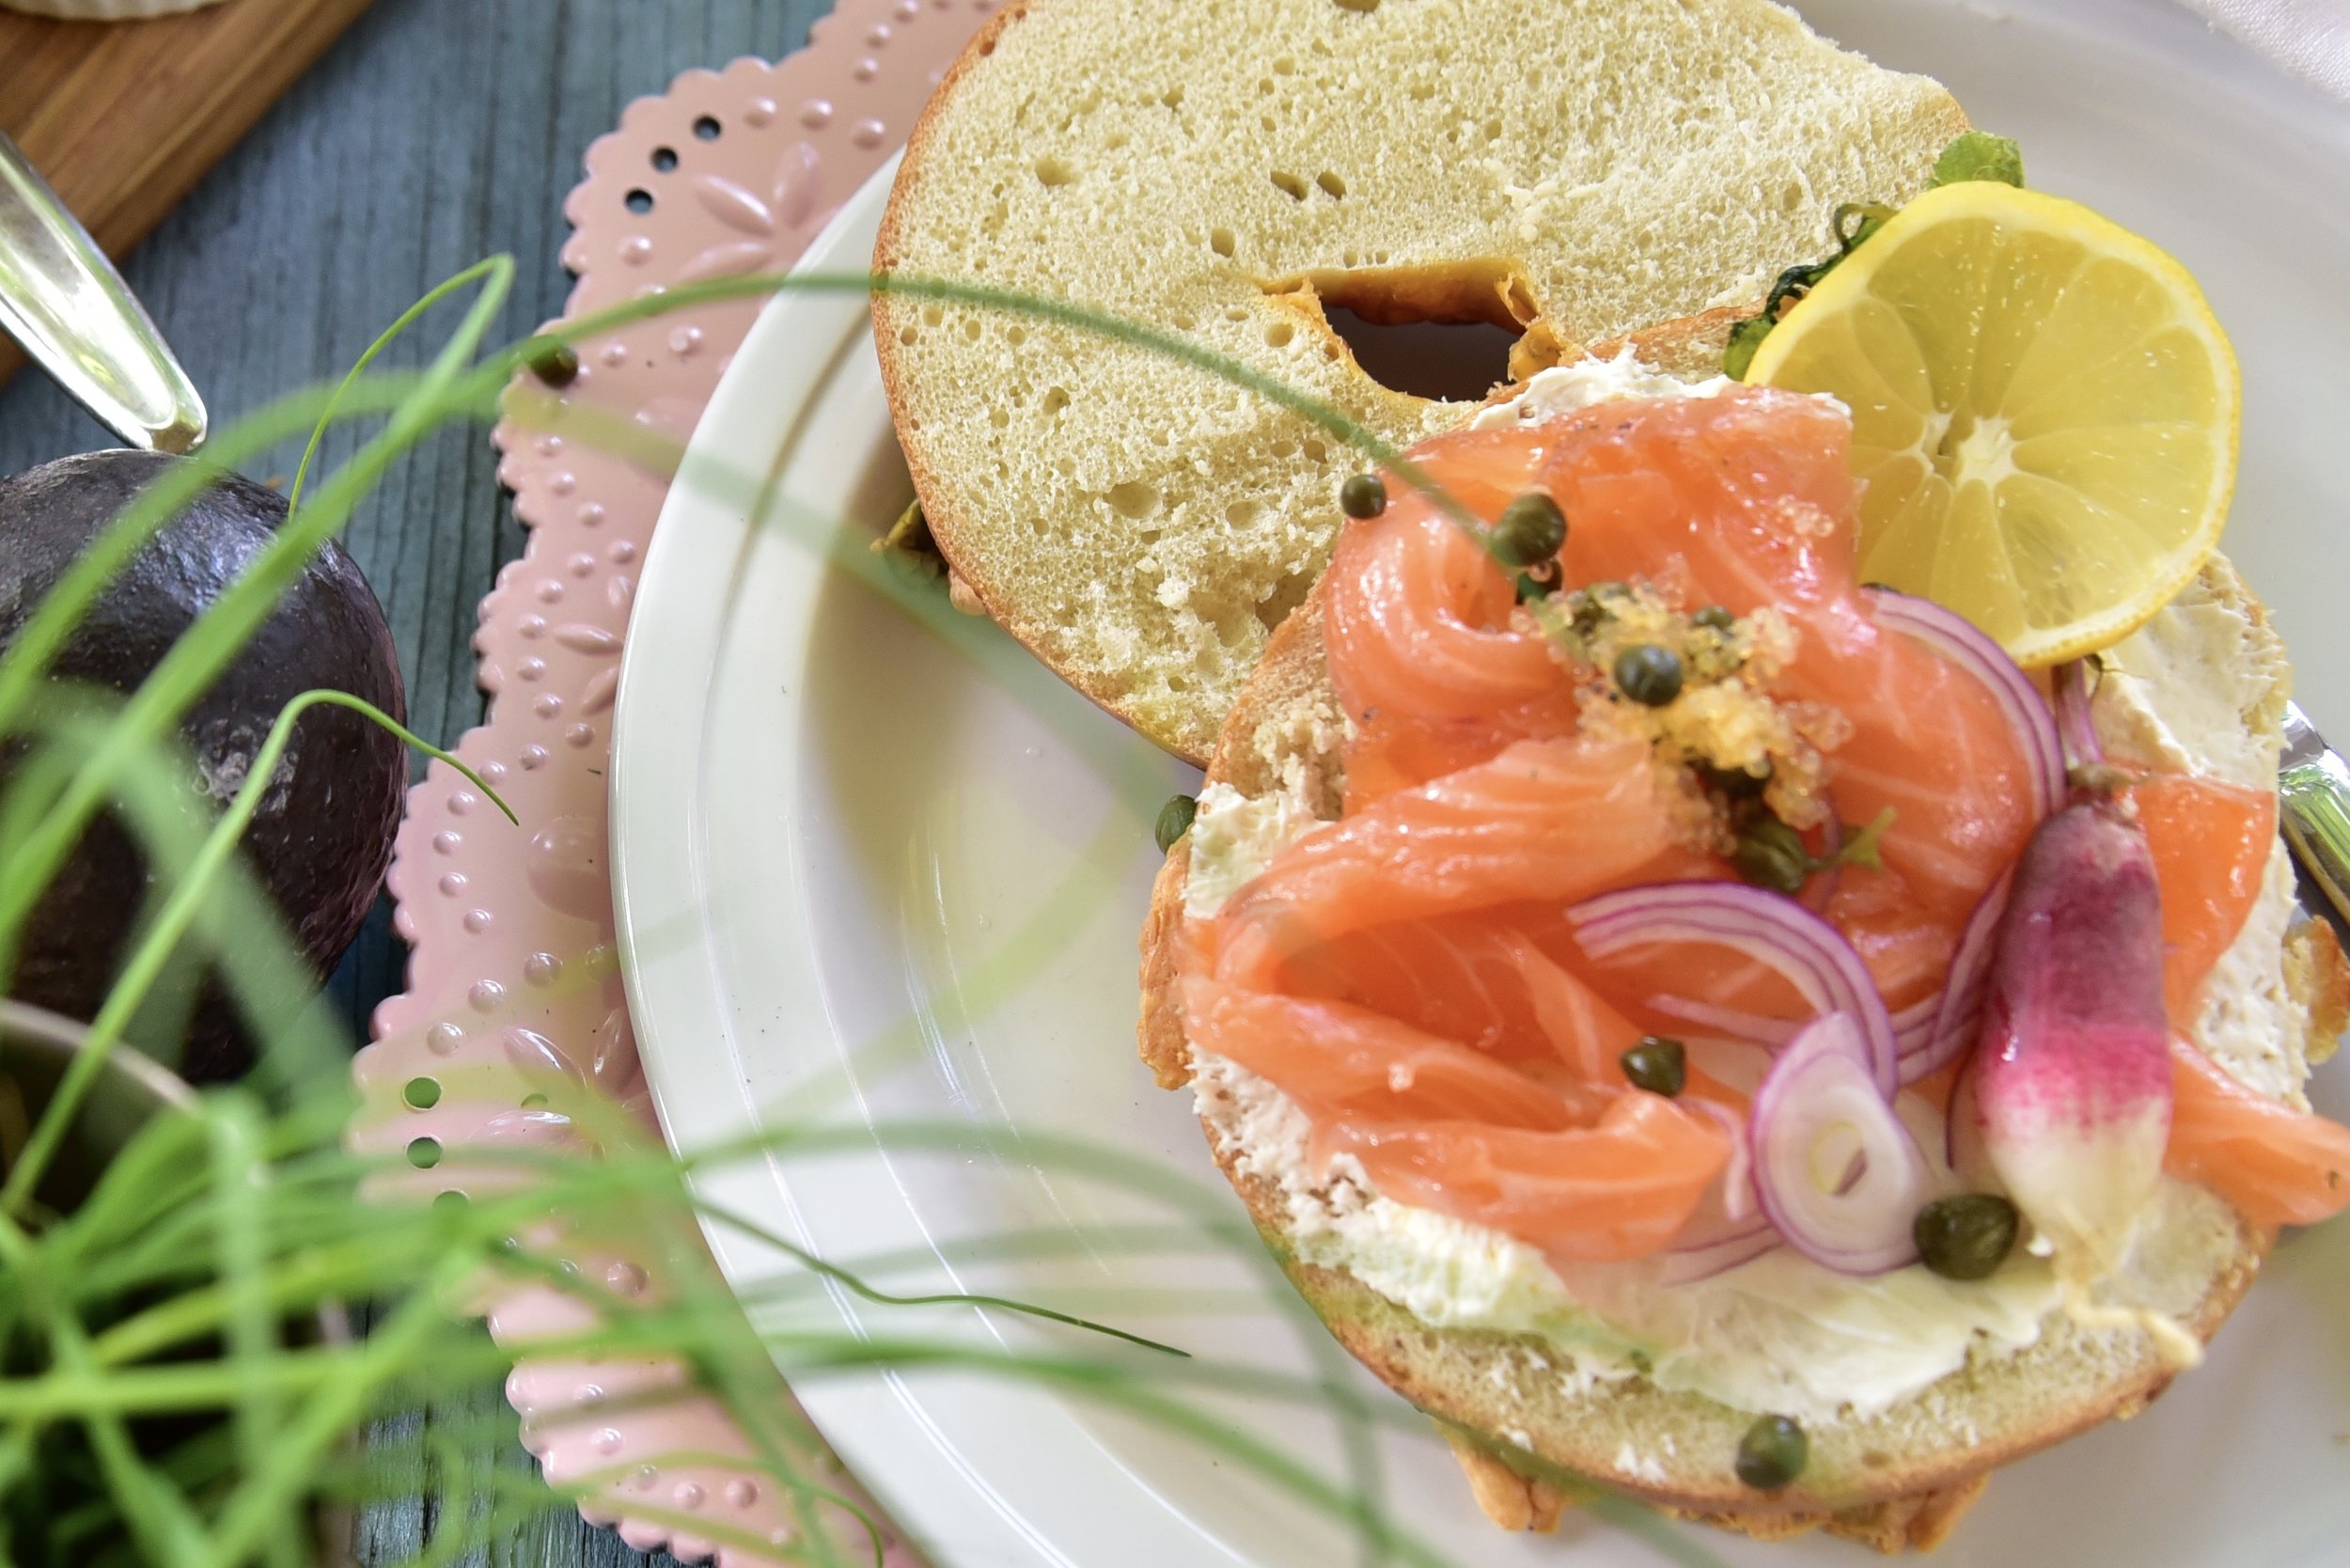 This bagel with home-brined salmon? How to win brunch.